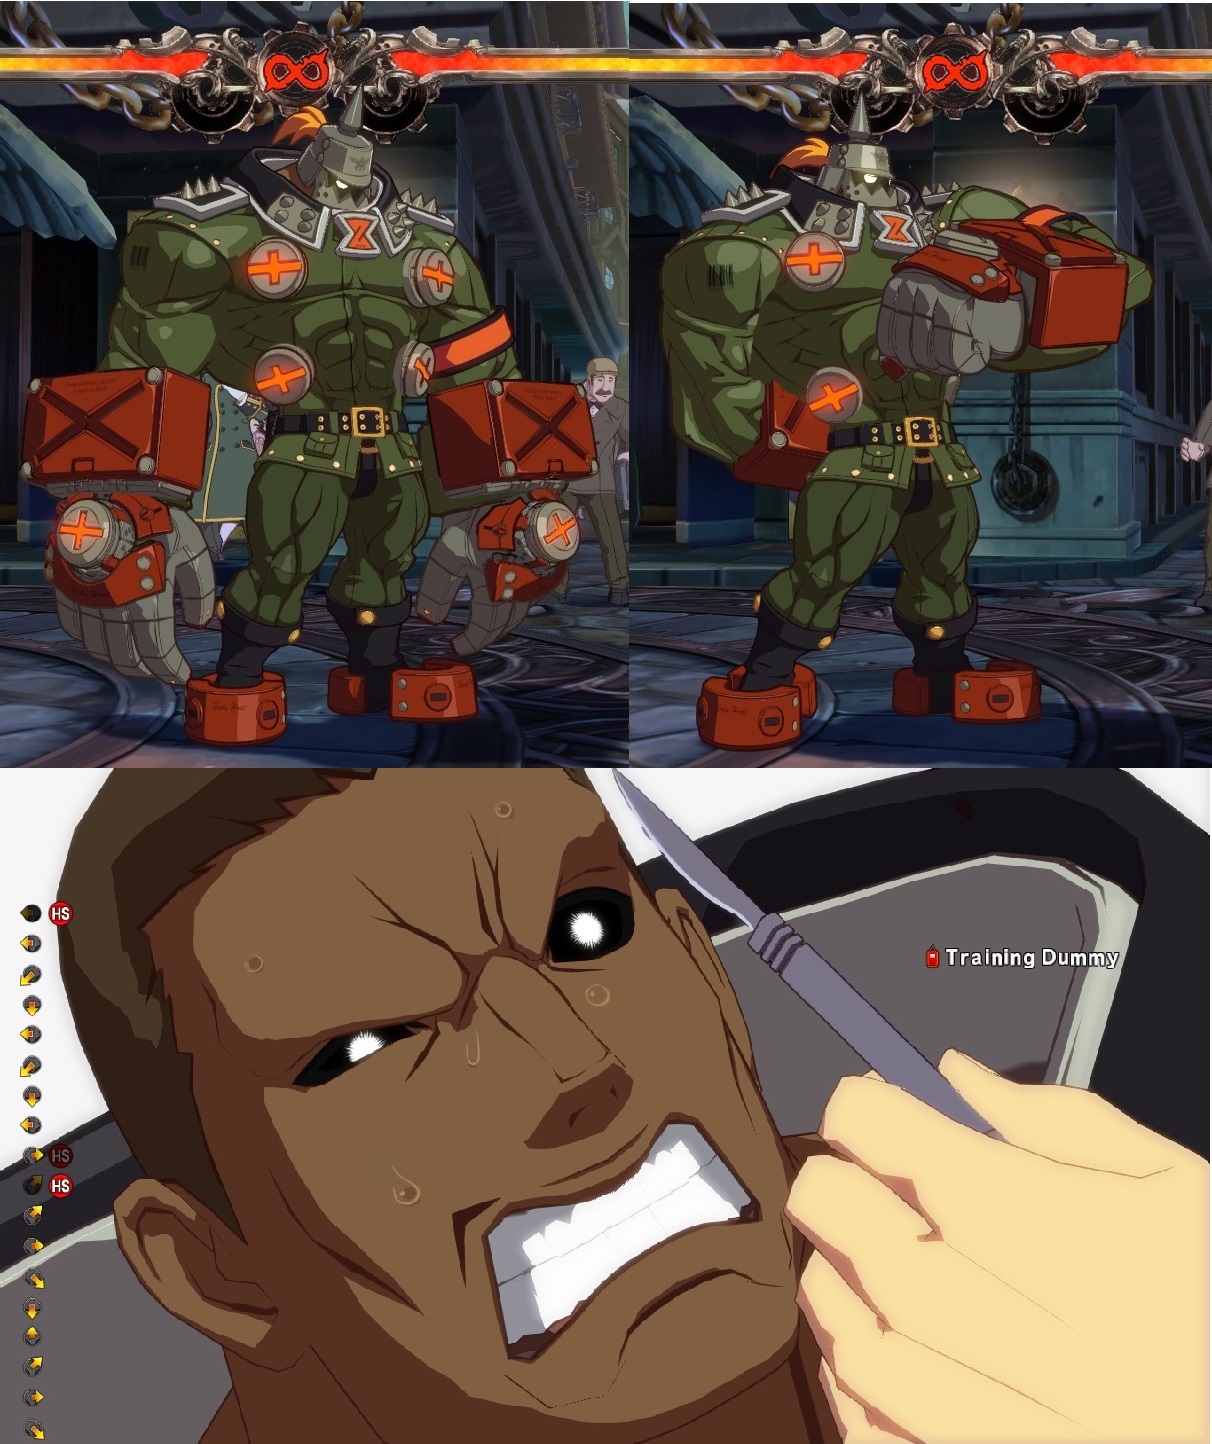 Potemkin from Guilty Gear with his pants off delirious with pleasure, wheth...